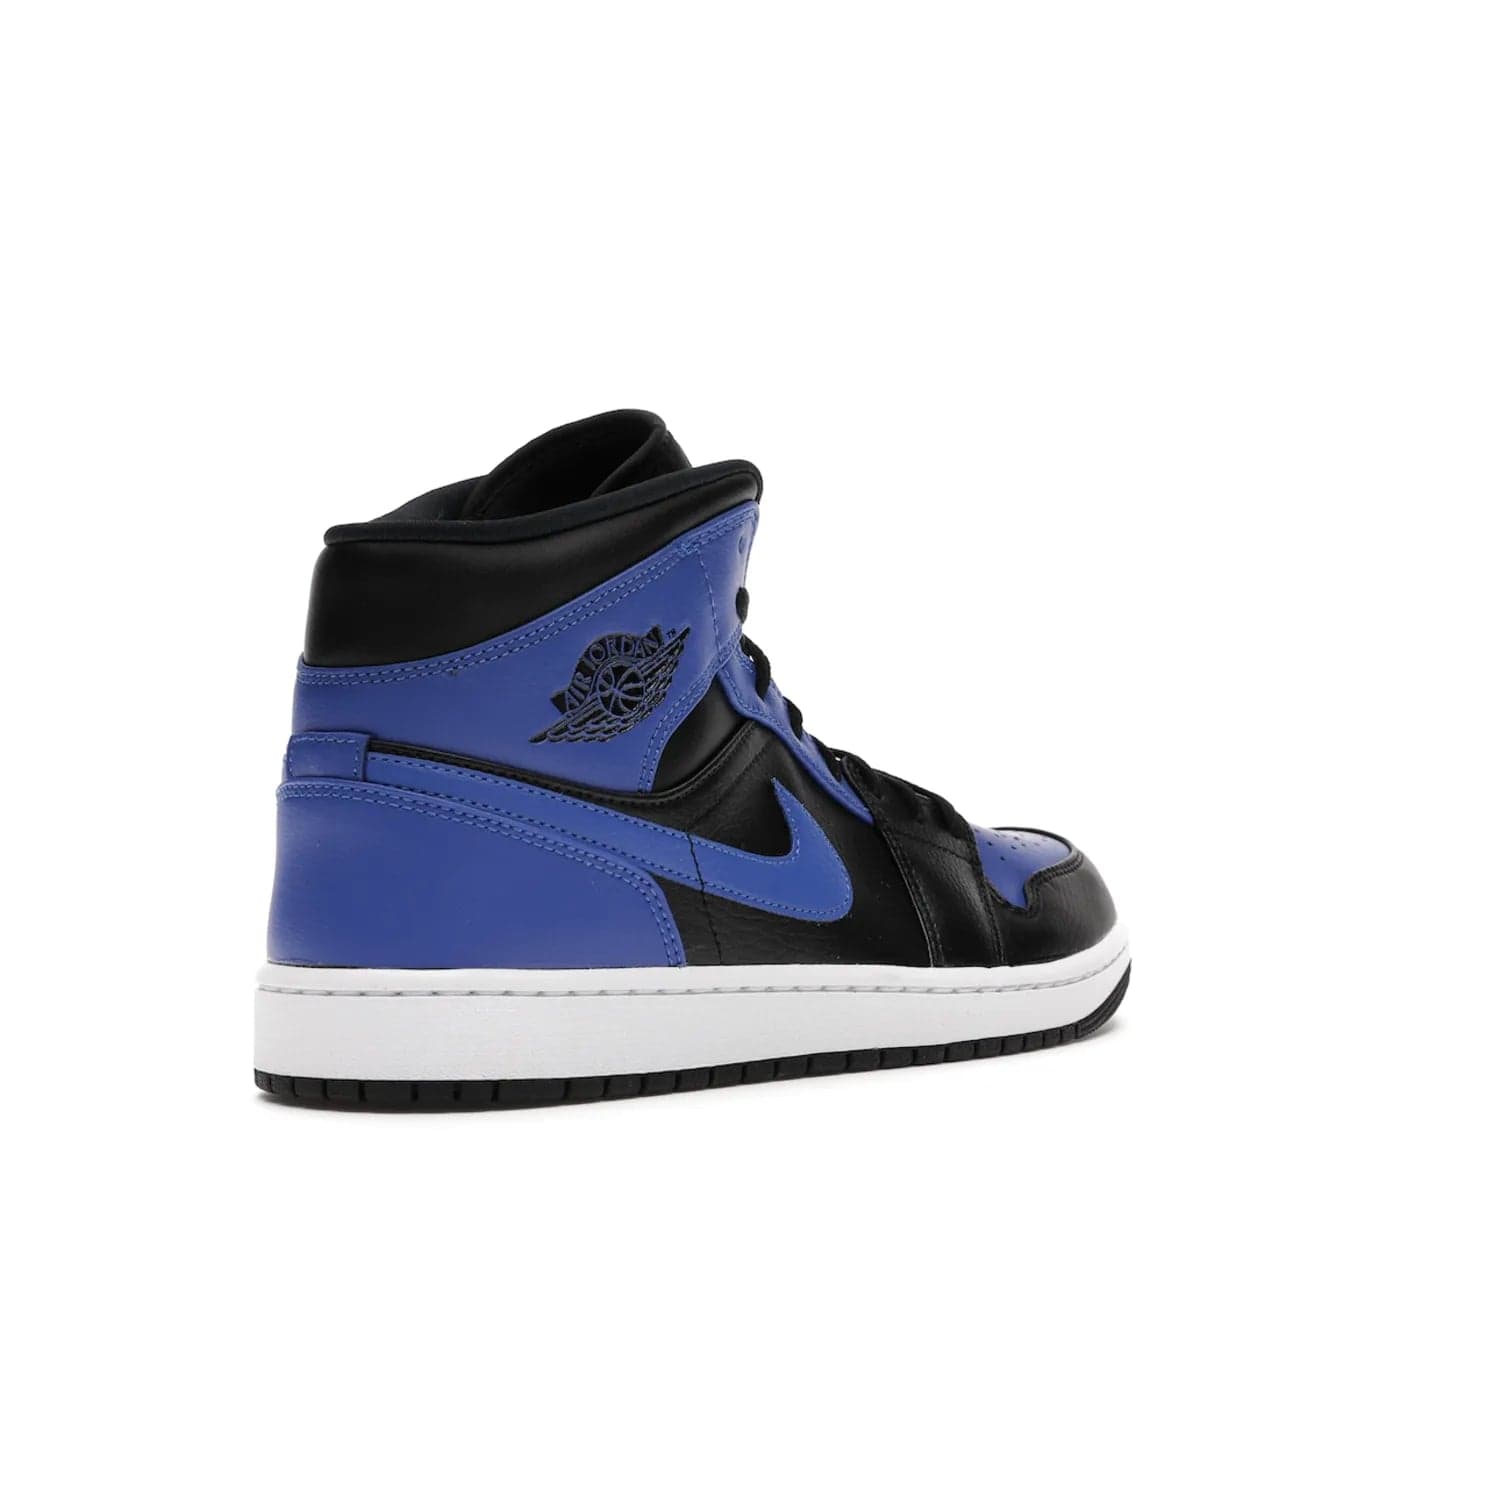 Jordan 1 Mid Hyper Royal Tumbled Leather - Image 32 - Only at www.BallersClubKickz.com - Iconic colorway of the Air Jordan 1 Mid Black Royal Tumbled Leather. Features a black tumbled leather upper, royal blue leather overlays, white midsole & black rubber outsole. Released December 2020. Adds premium style to any collection.